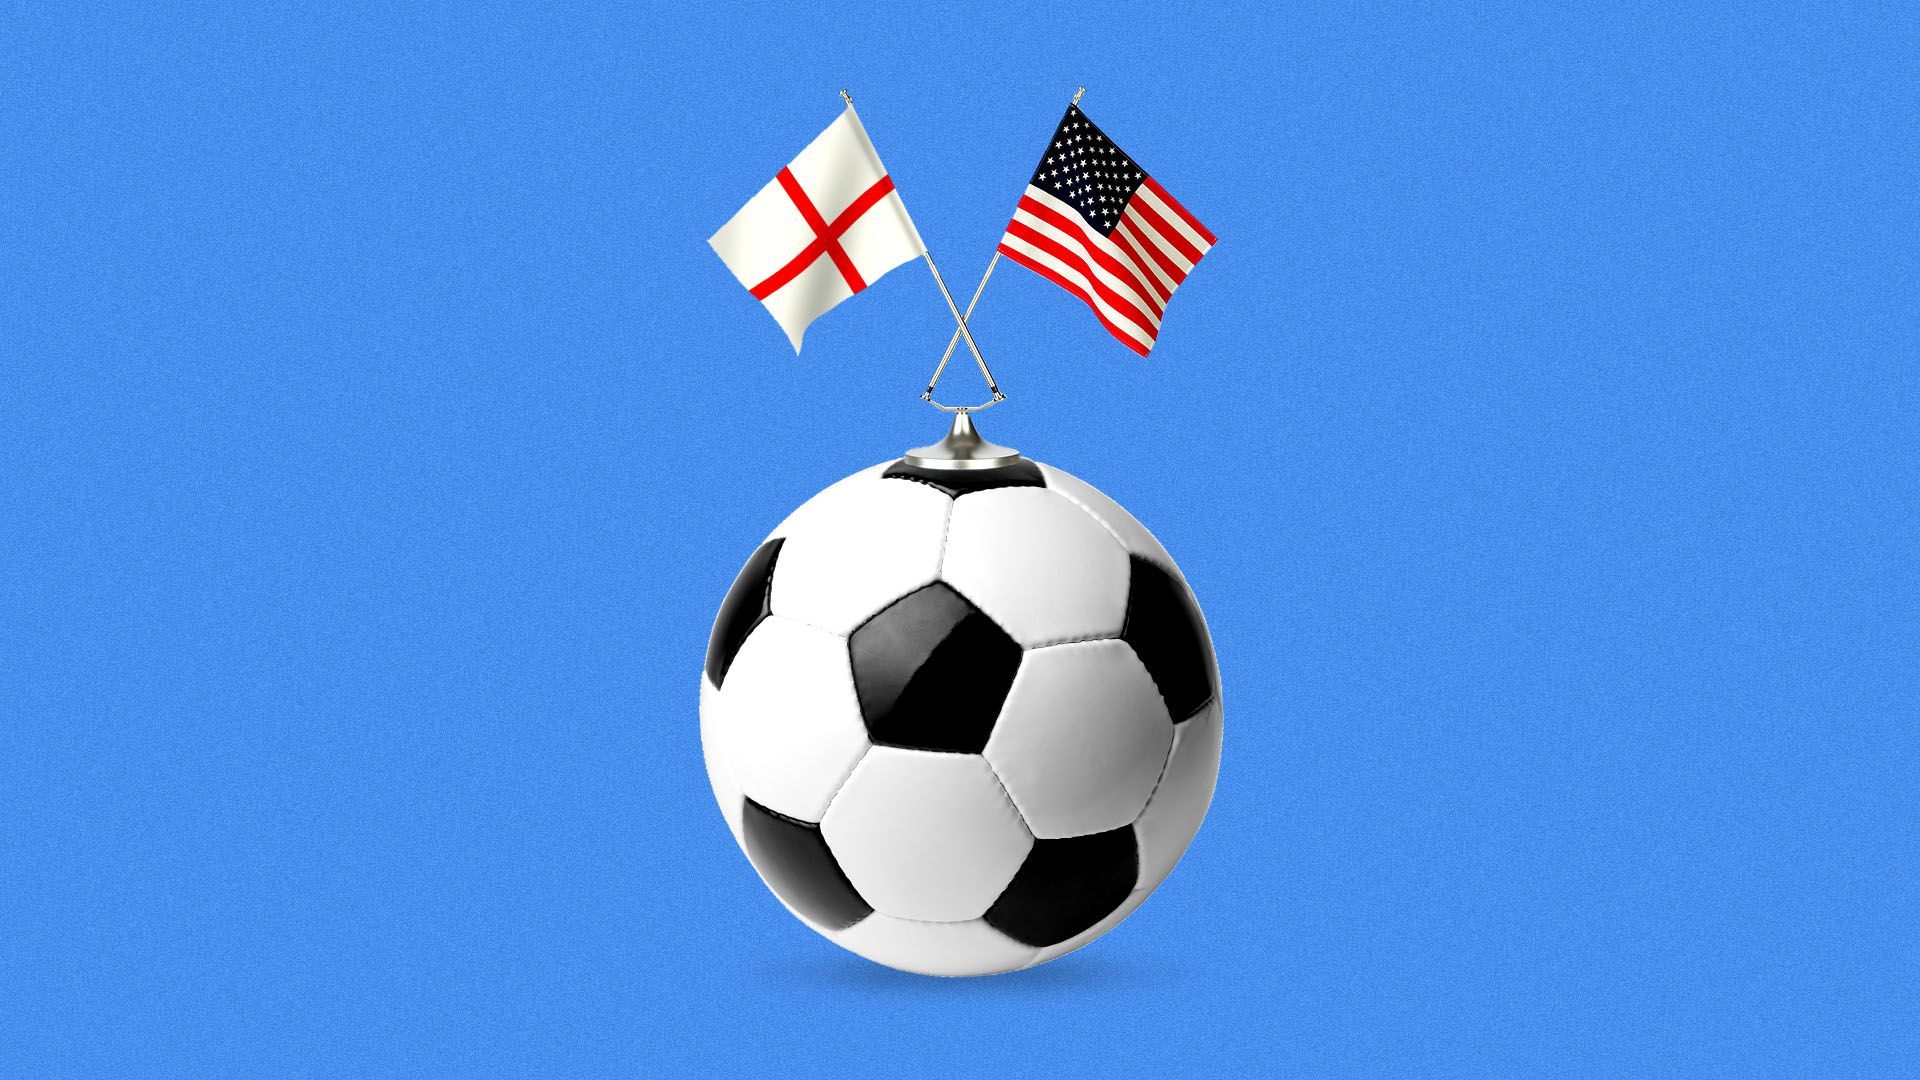 Illustration of a soccer ball with the flags of England and the United States on top